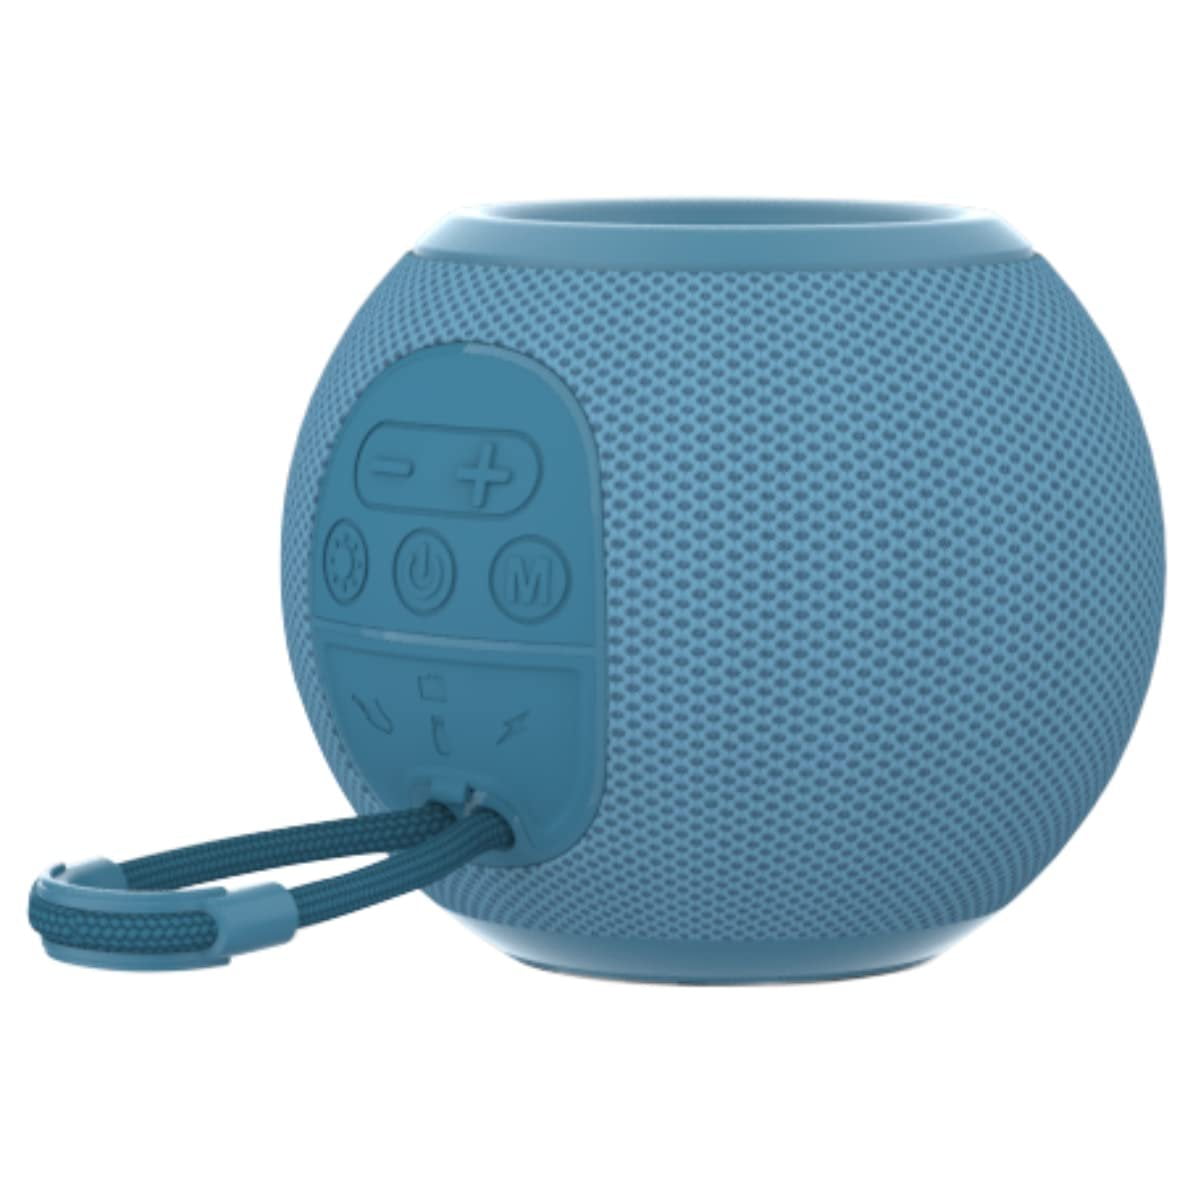 Portronics Resound Bluetooth Speaker 9 Shop Mobile Accessories Online in India